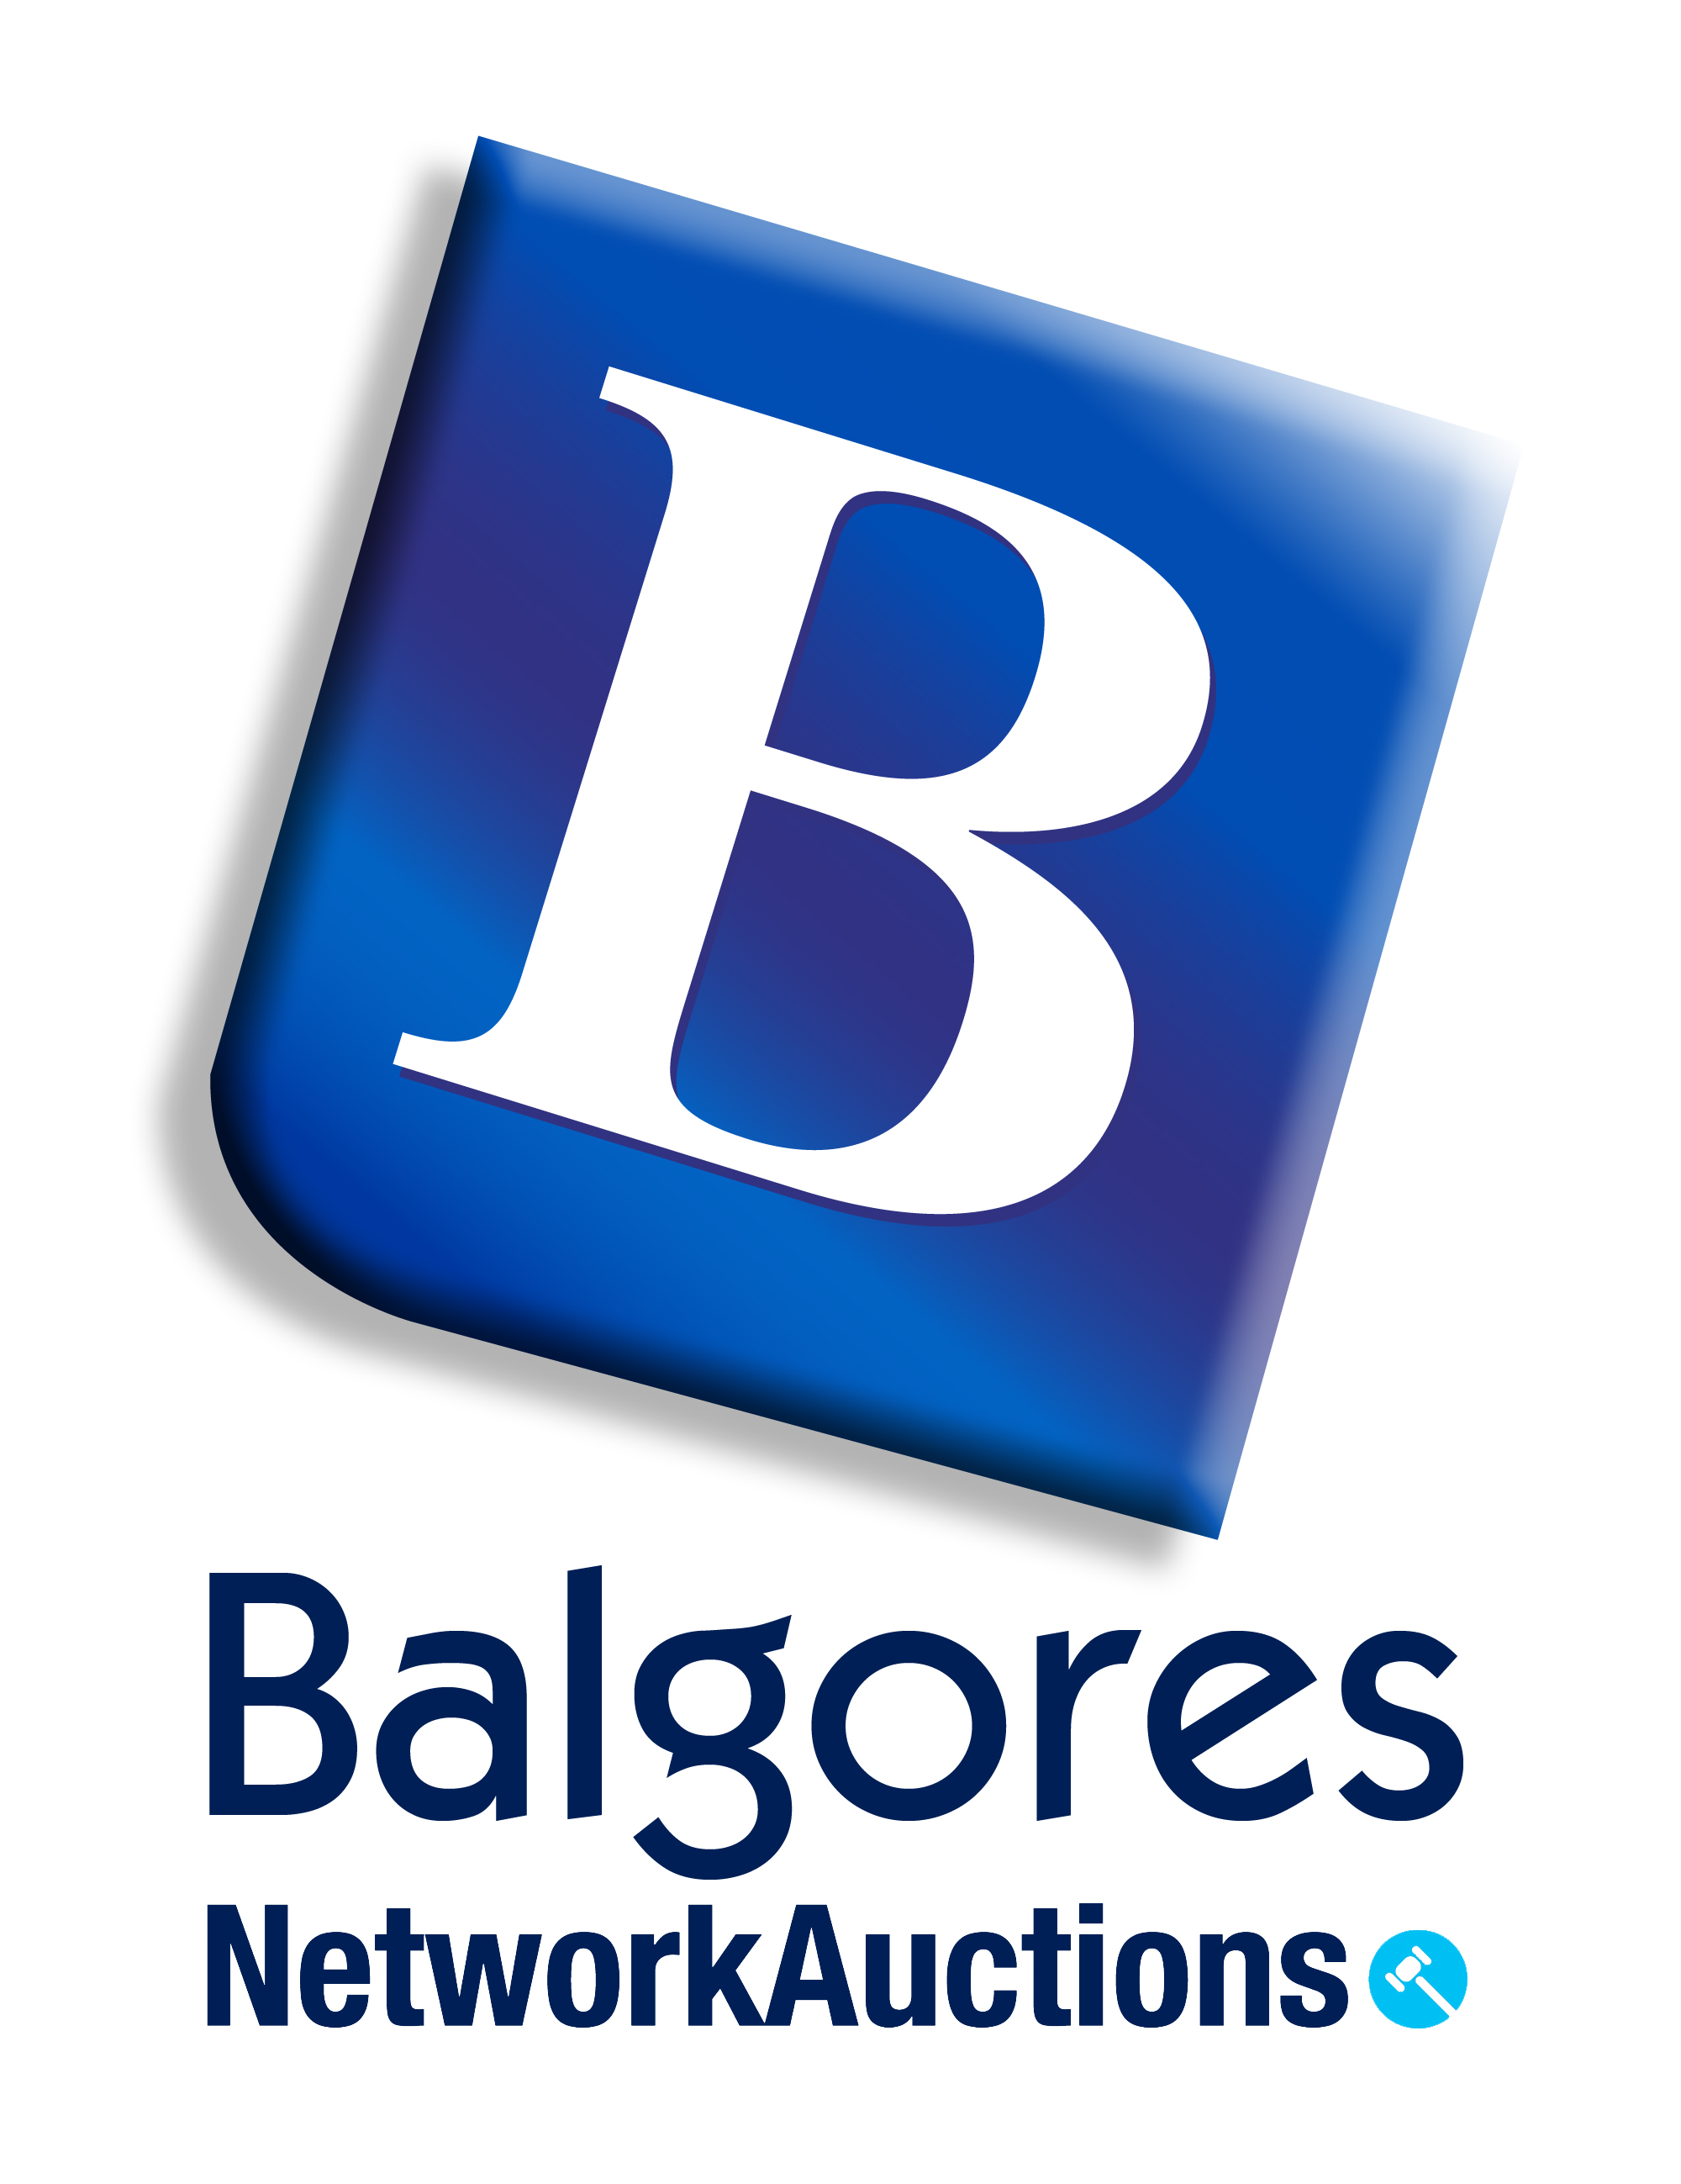 Please contact Balgores Network Auctions on 01277 216800.